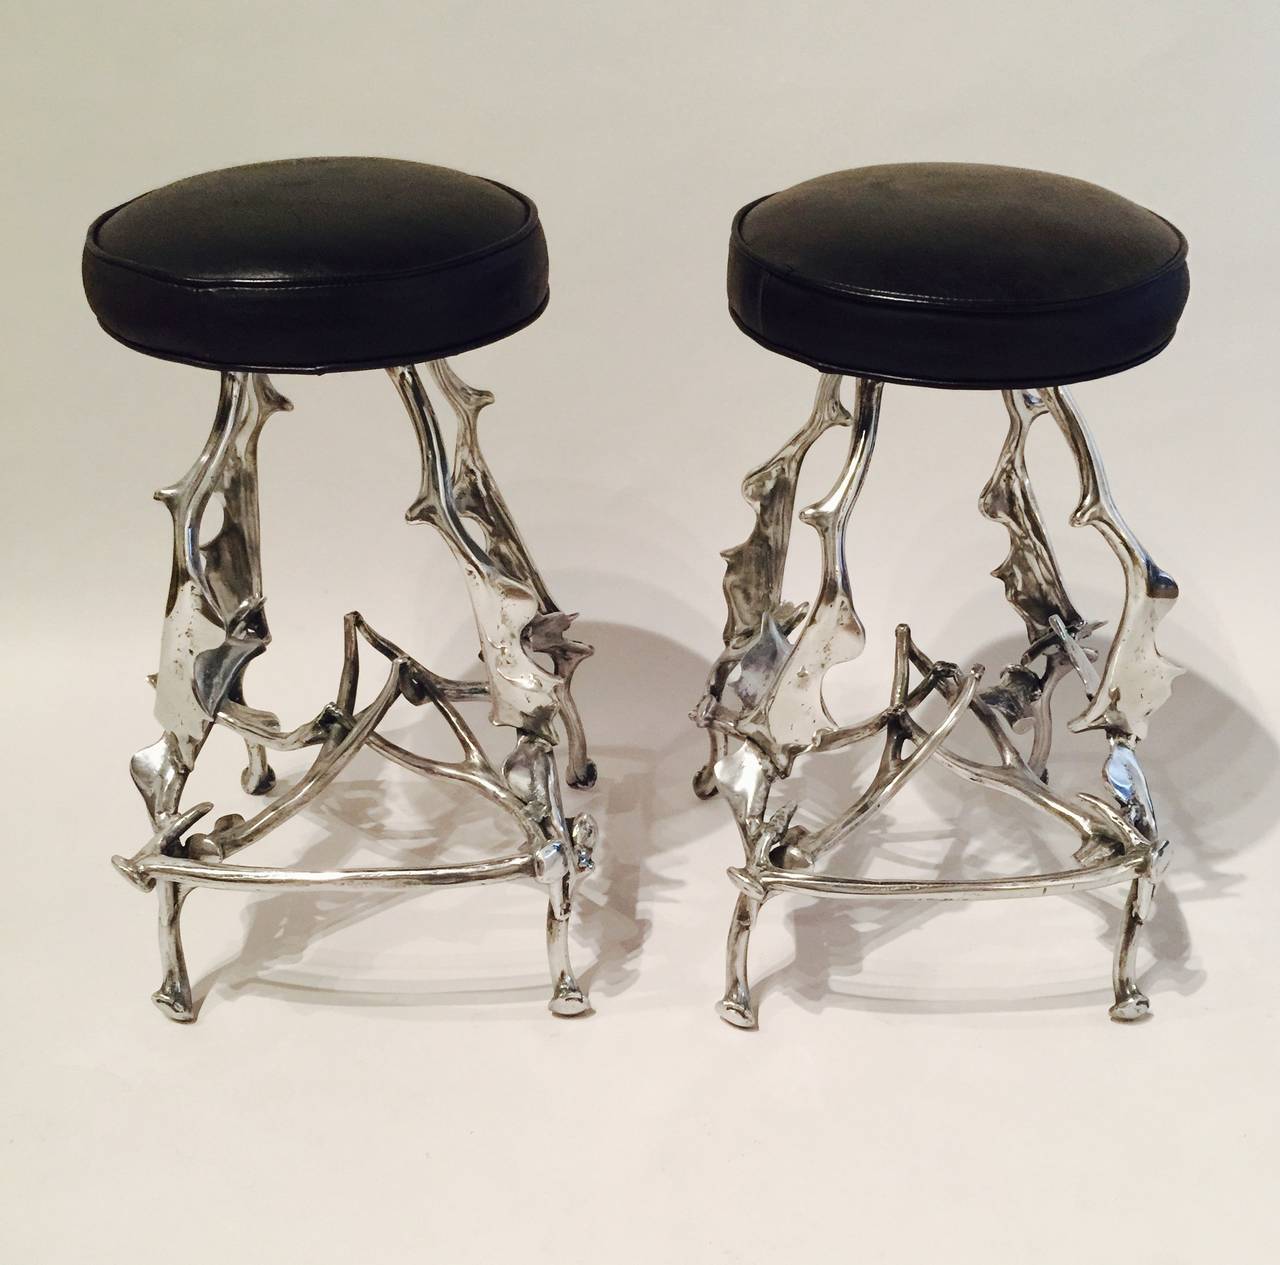 A Pair of Polished Aluminum Antler Barstools By Arthur Court With Newer Black Leather Seats (Diameter Of Seat Is 15